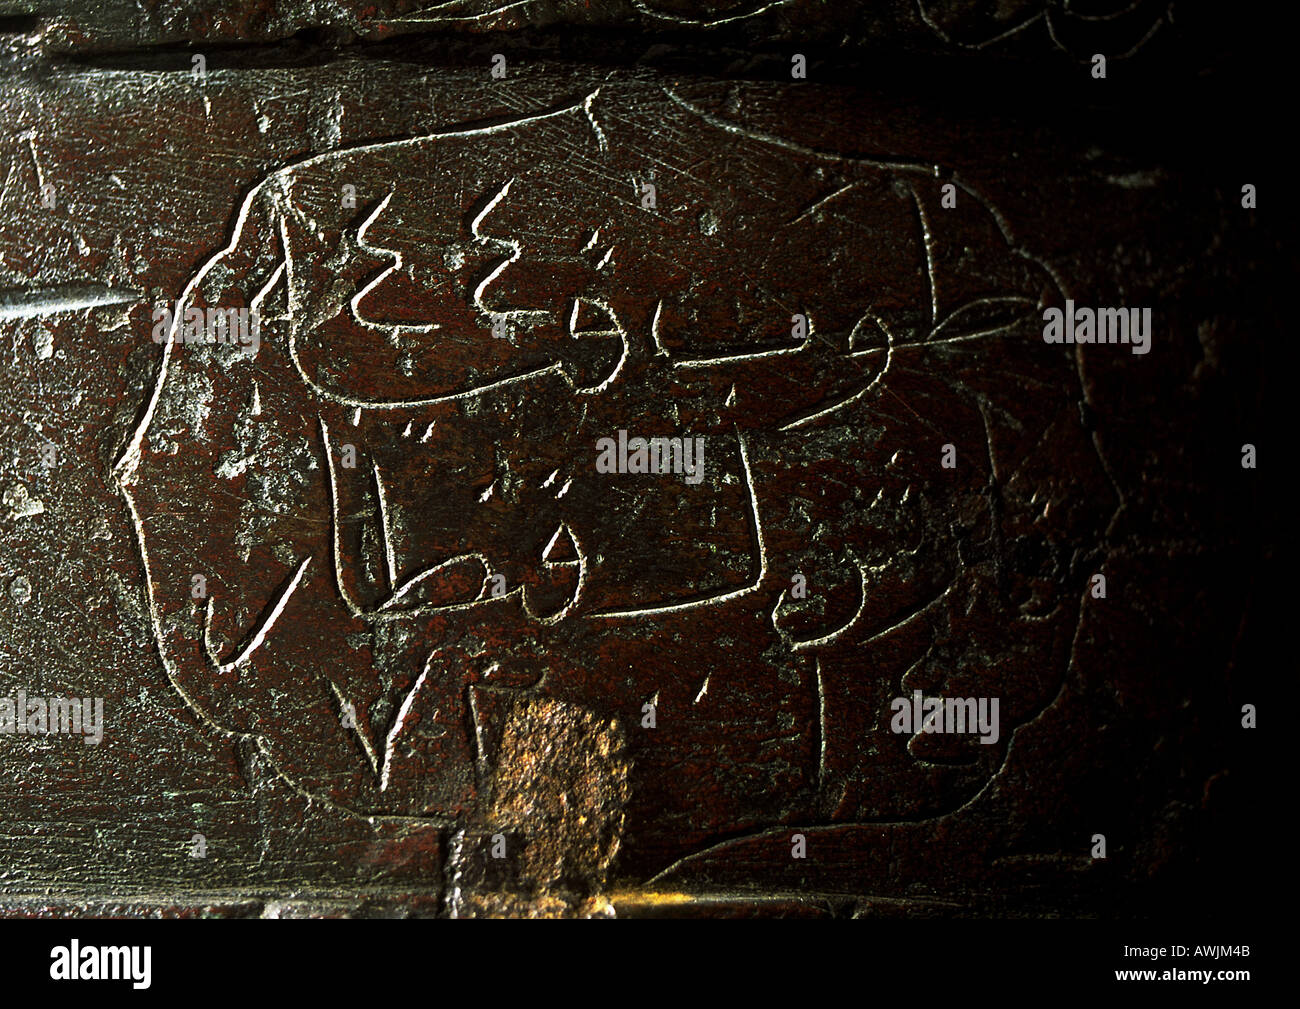 Arabic engraved in stone wall. Stock Photo